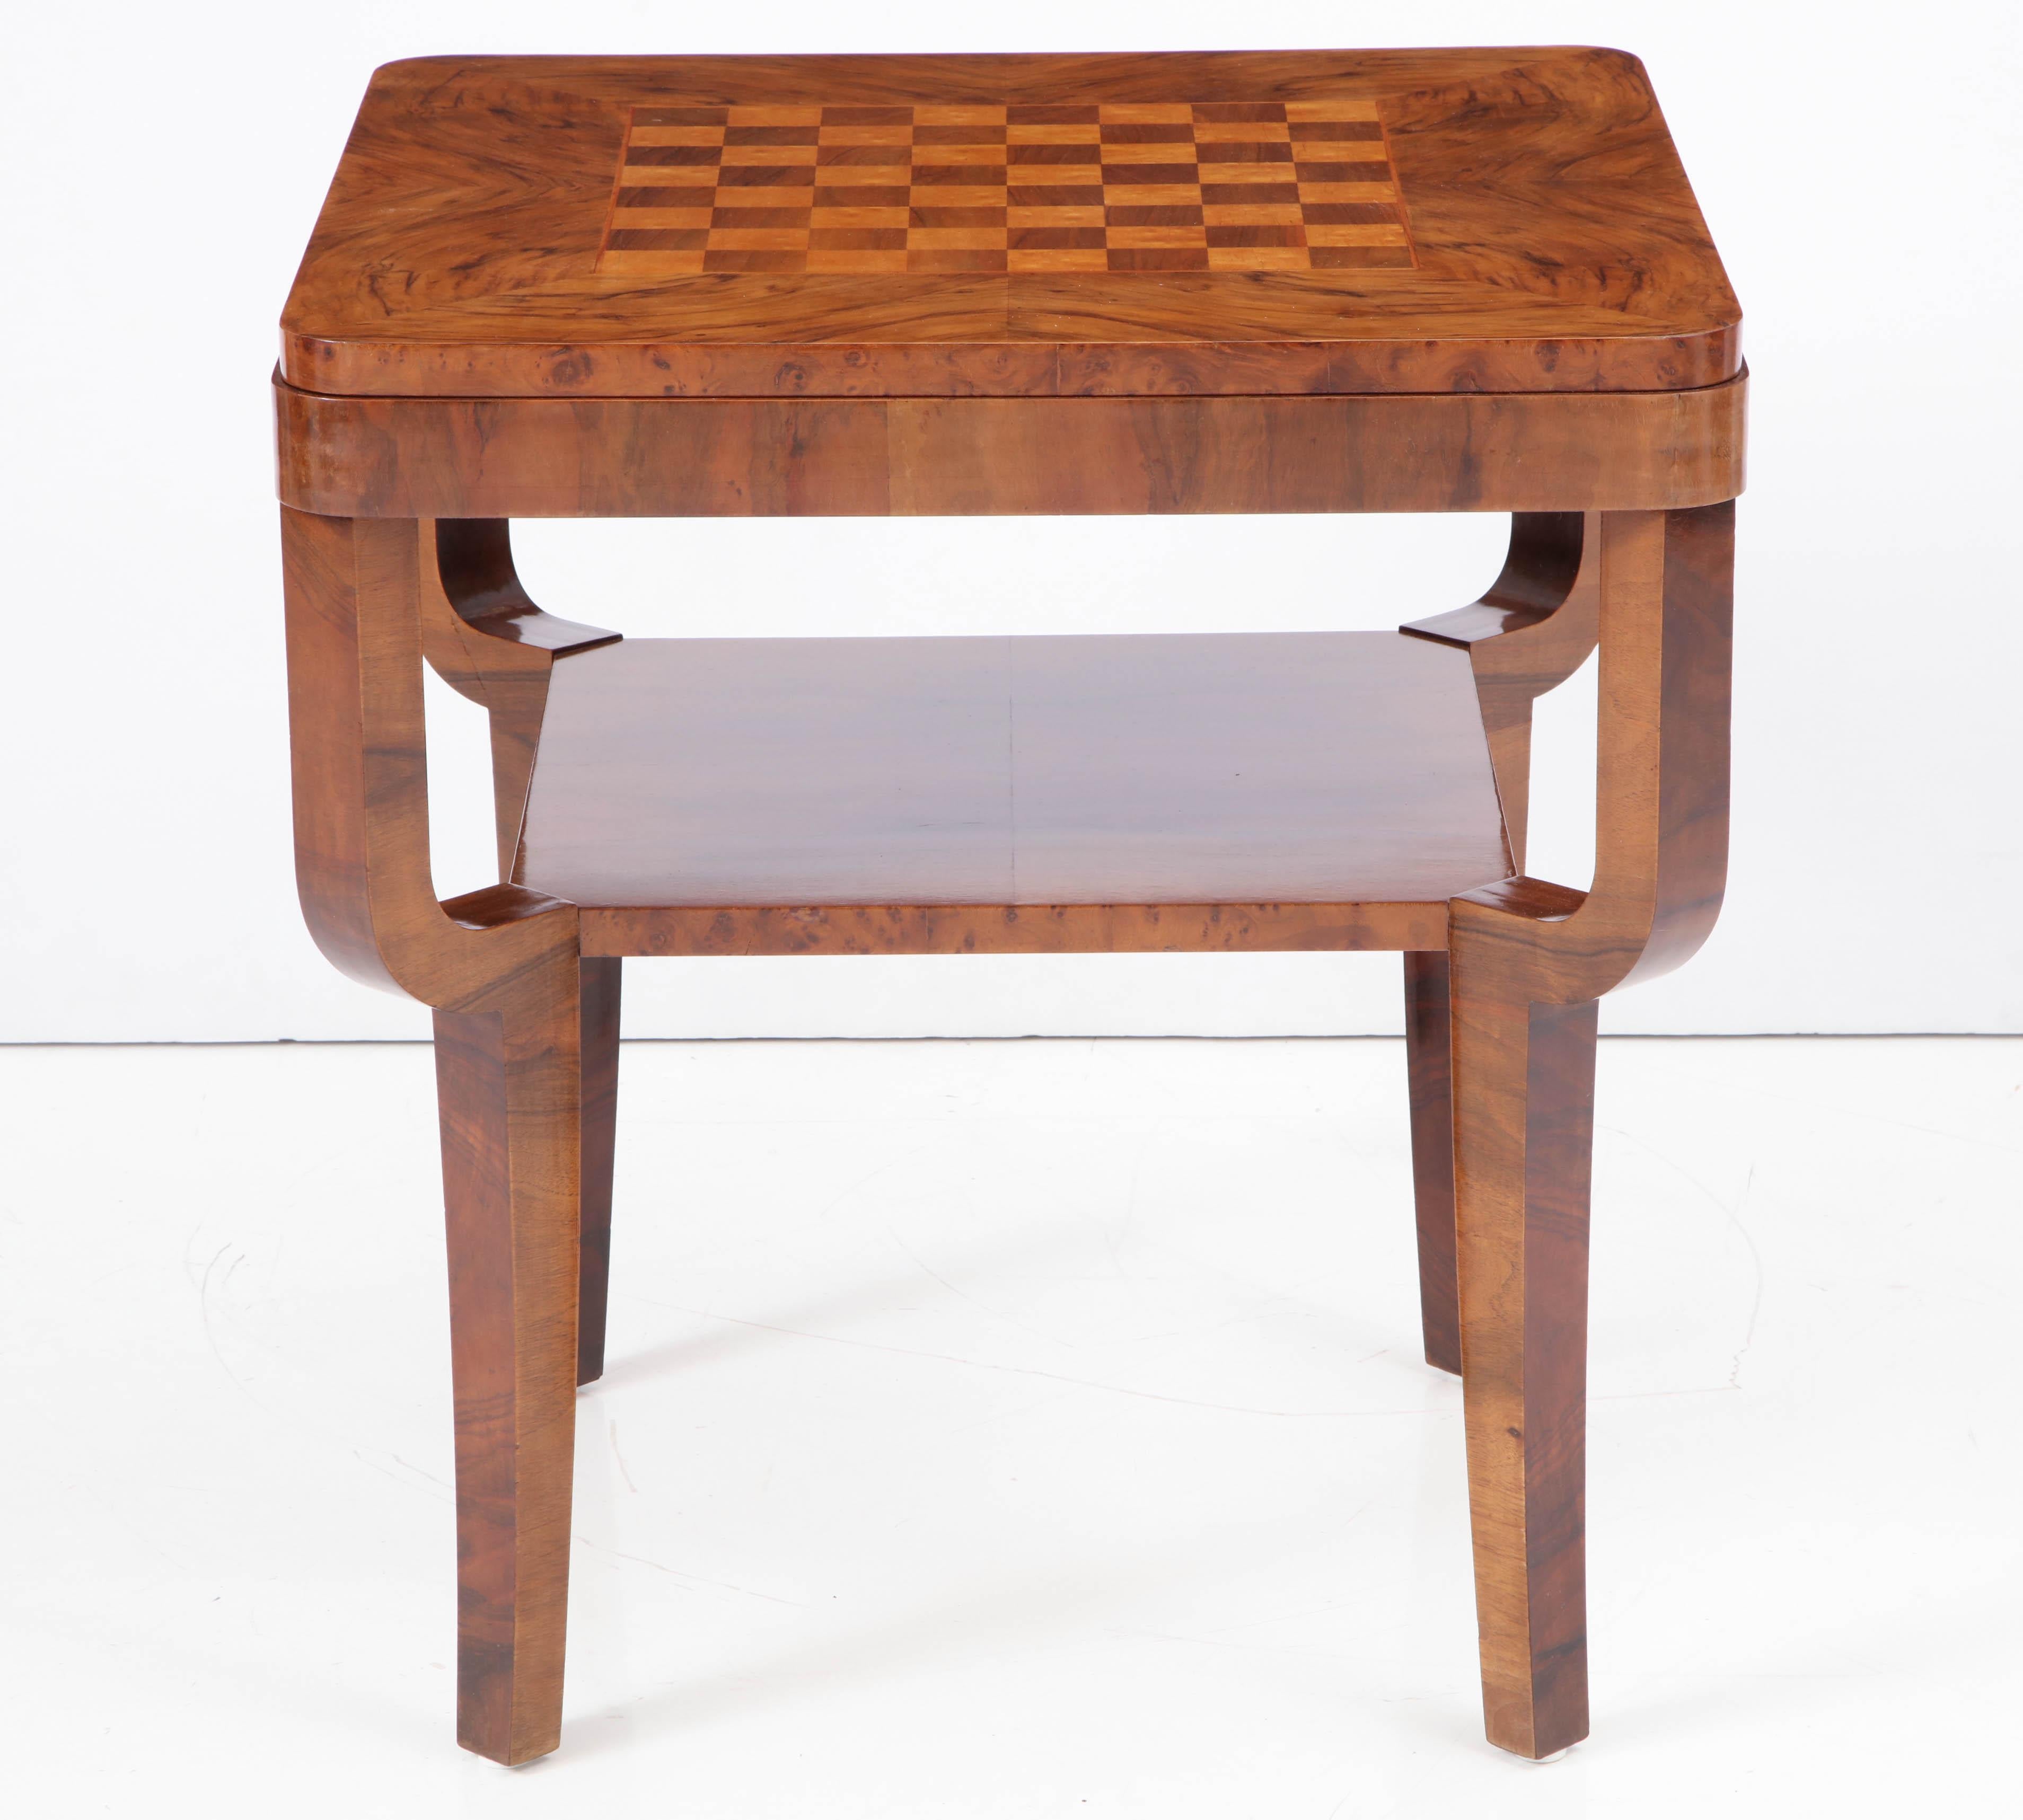 A Swedish Art Deco walnut and birchwood games table, circa 1930s, the slightly stepped square top with an inset games board, raised on curved and square legs with a shelf.